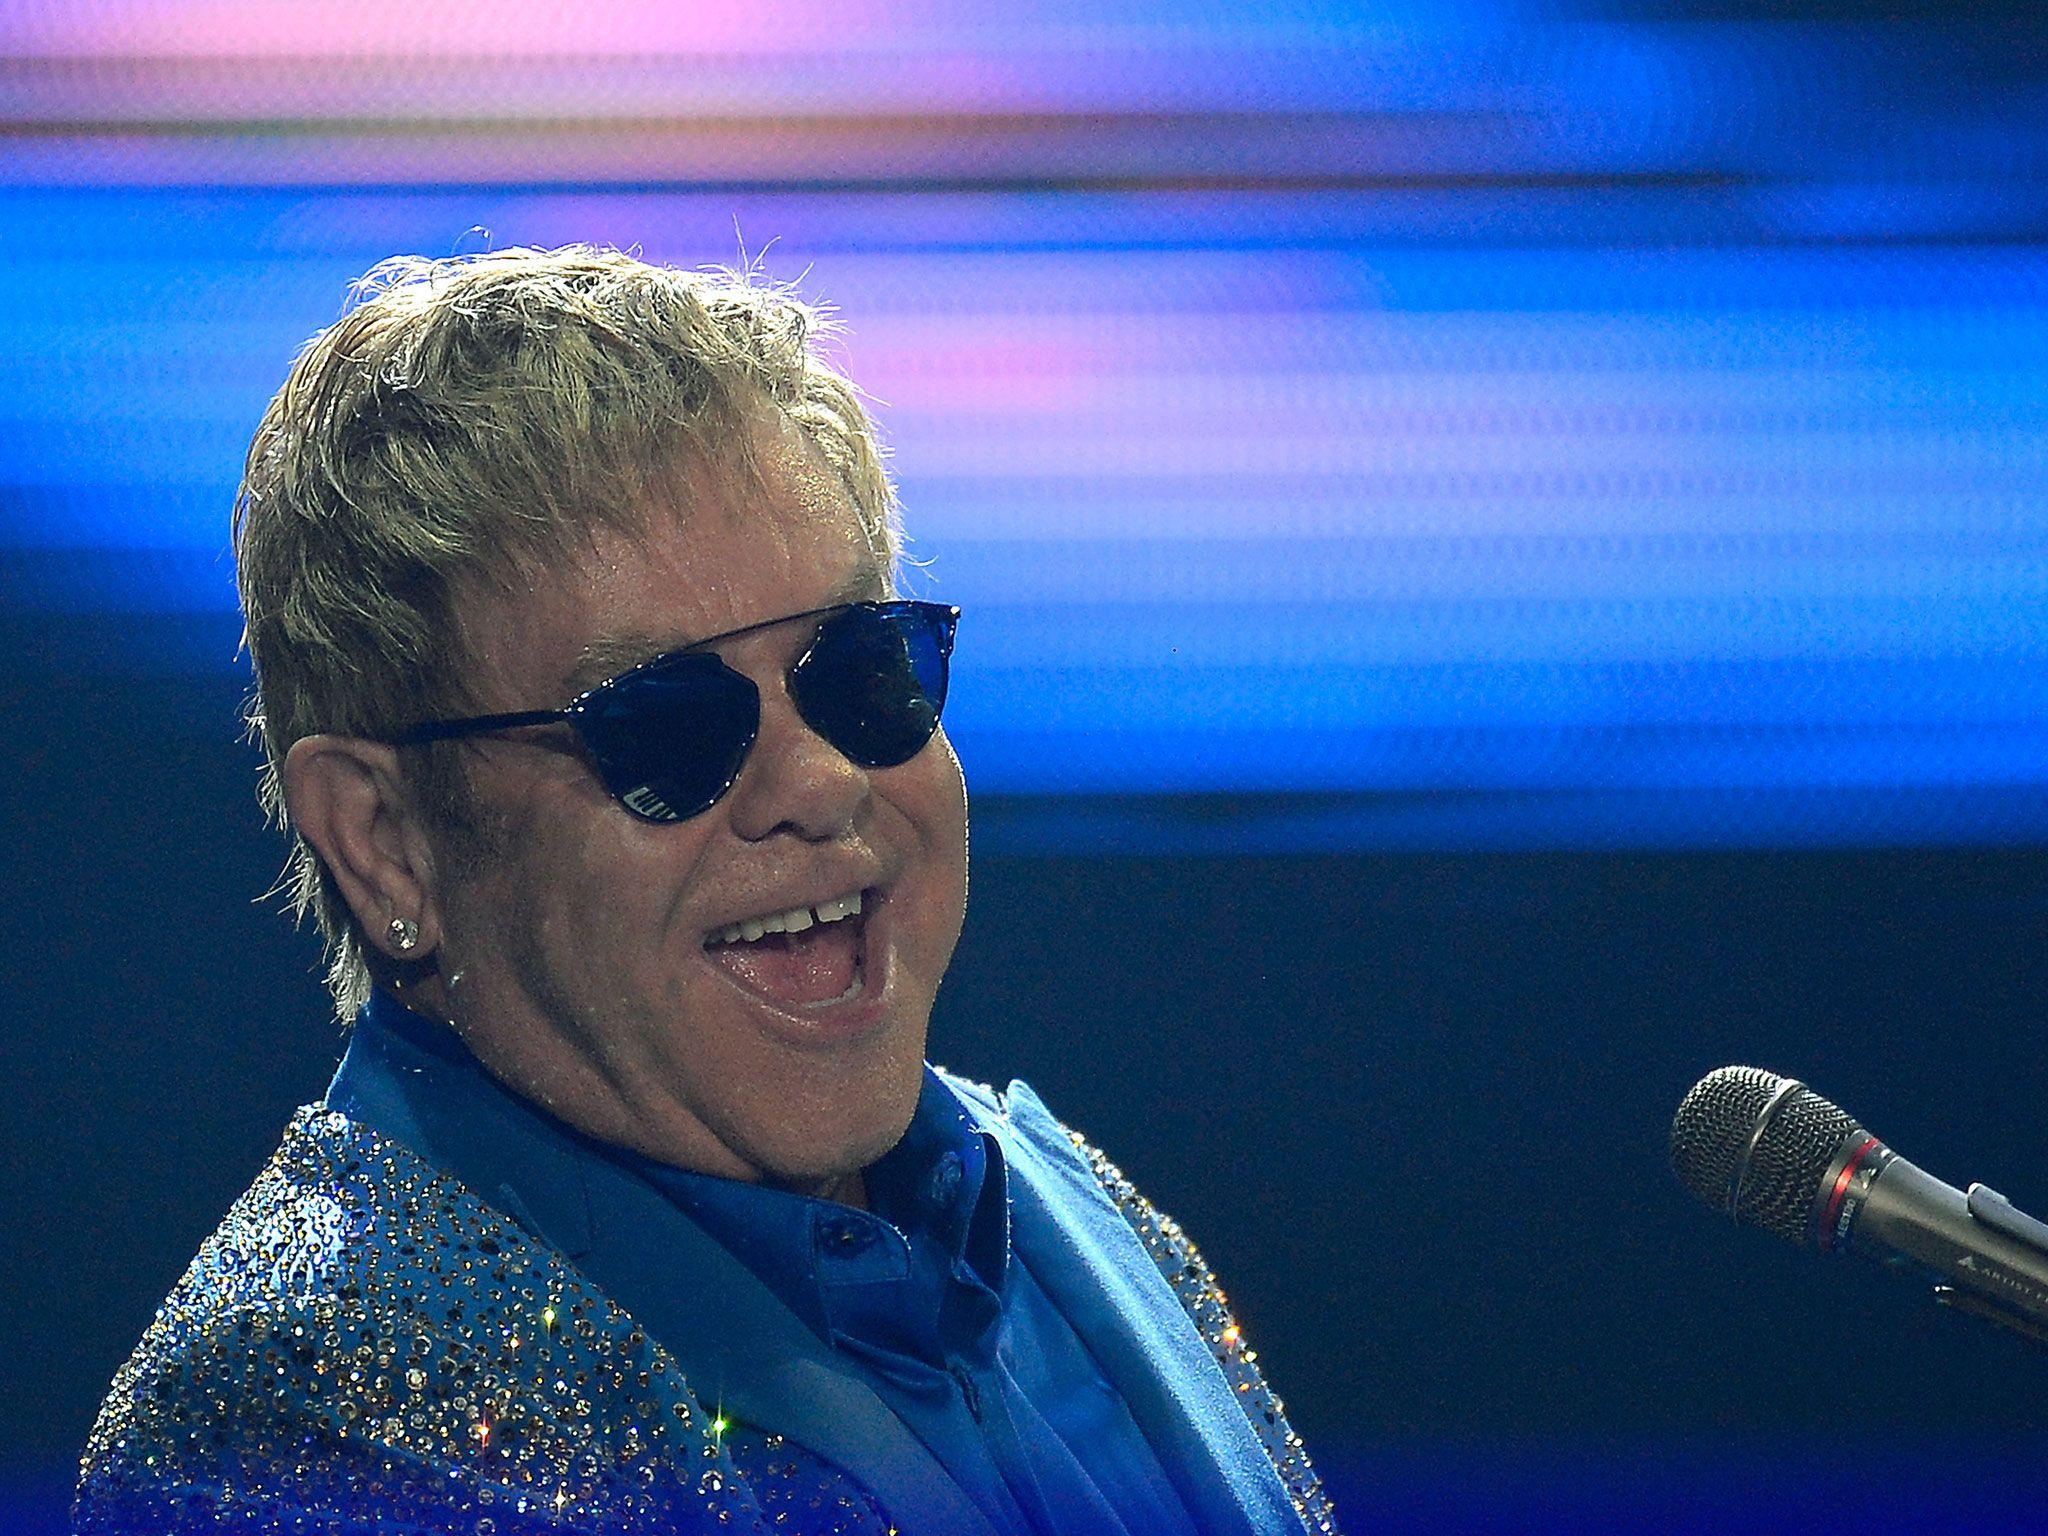 How Elton John Reconciled With Madonna After 10 Year Feud